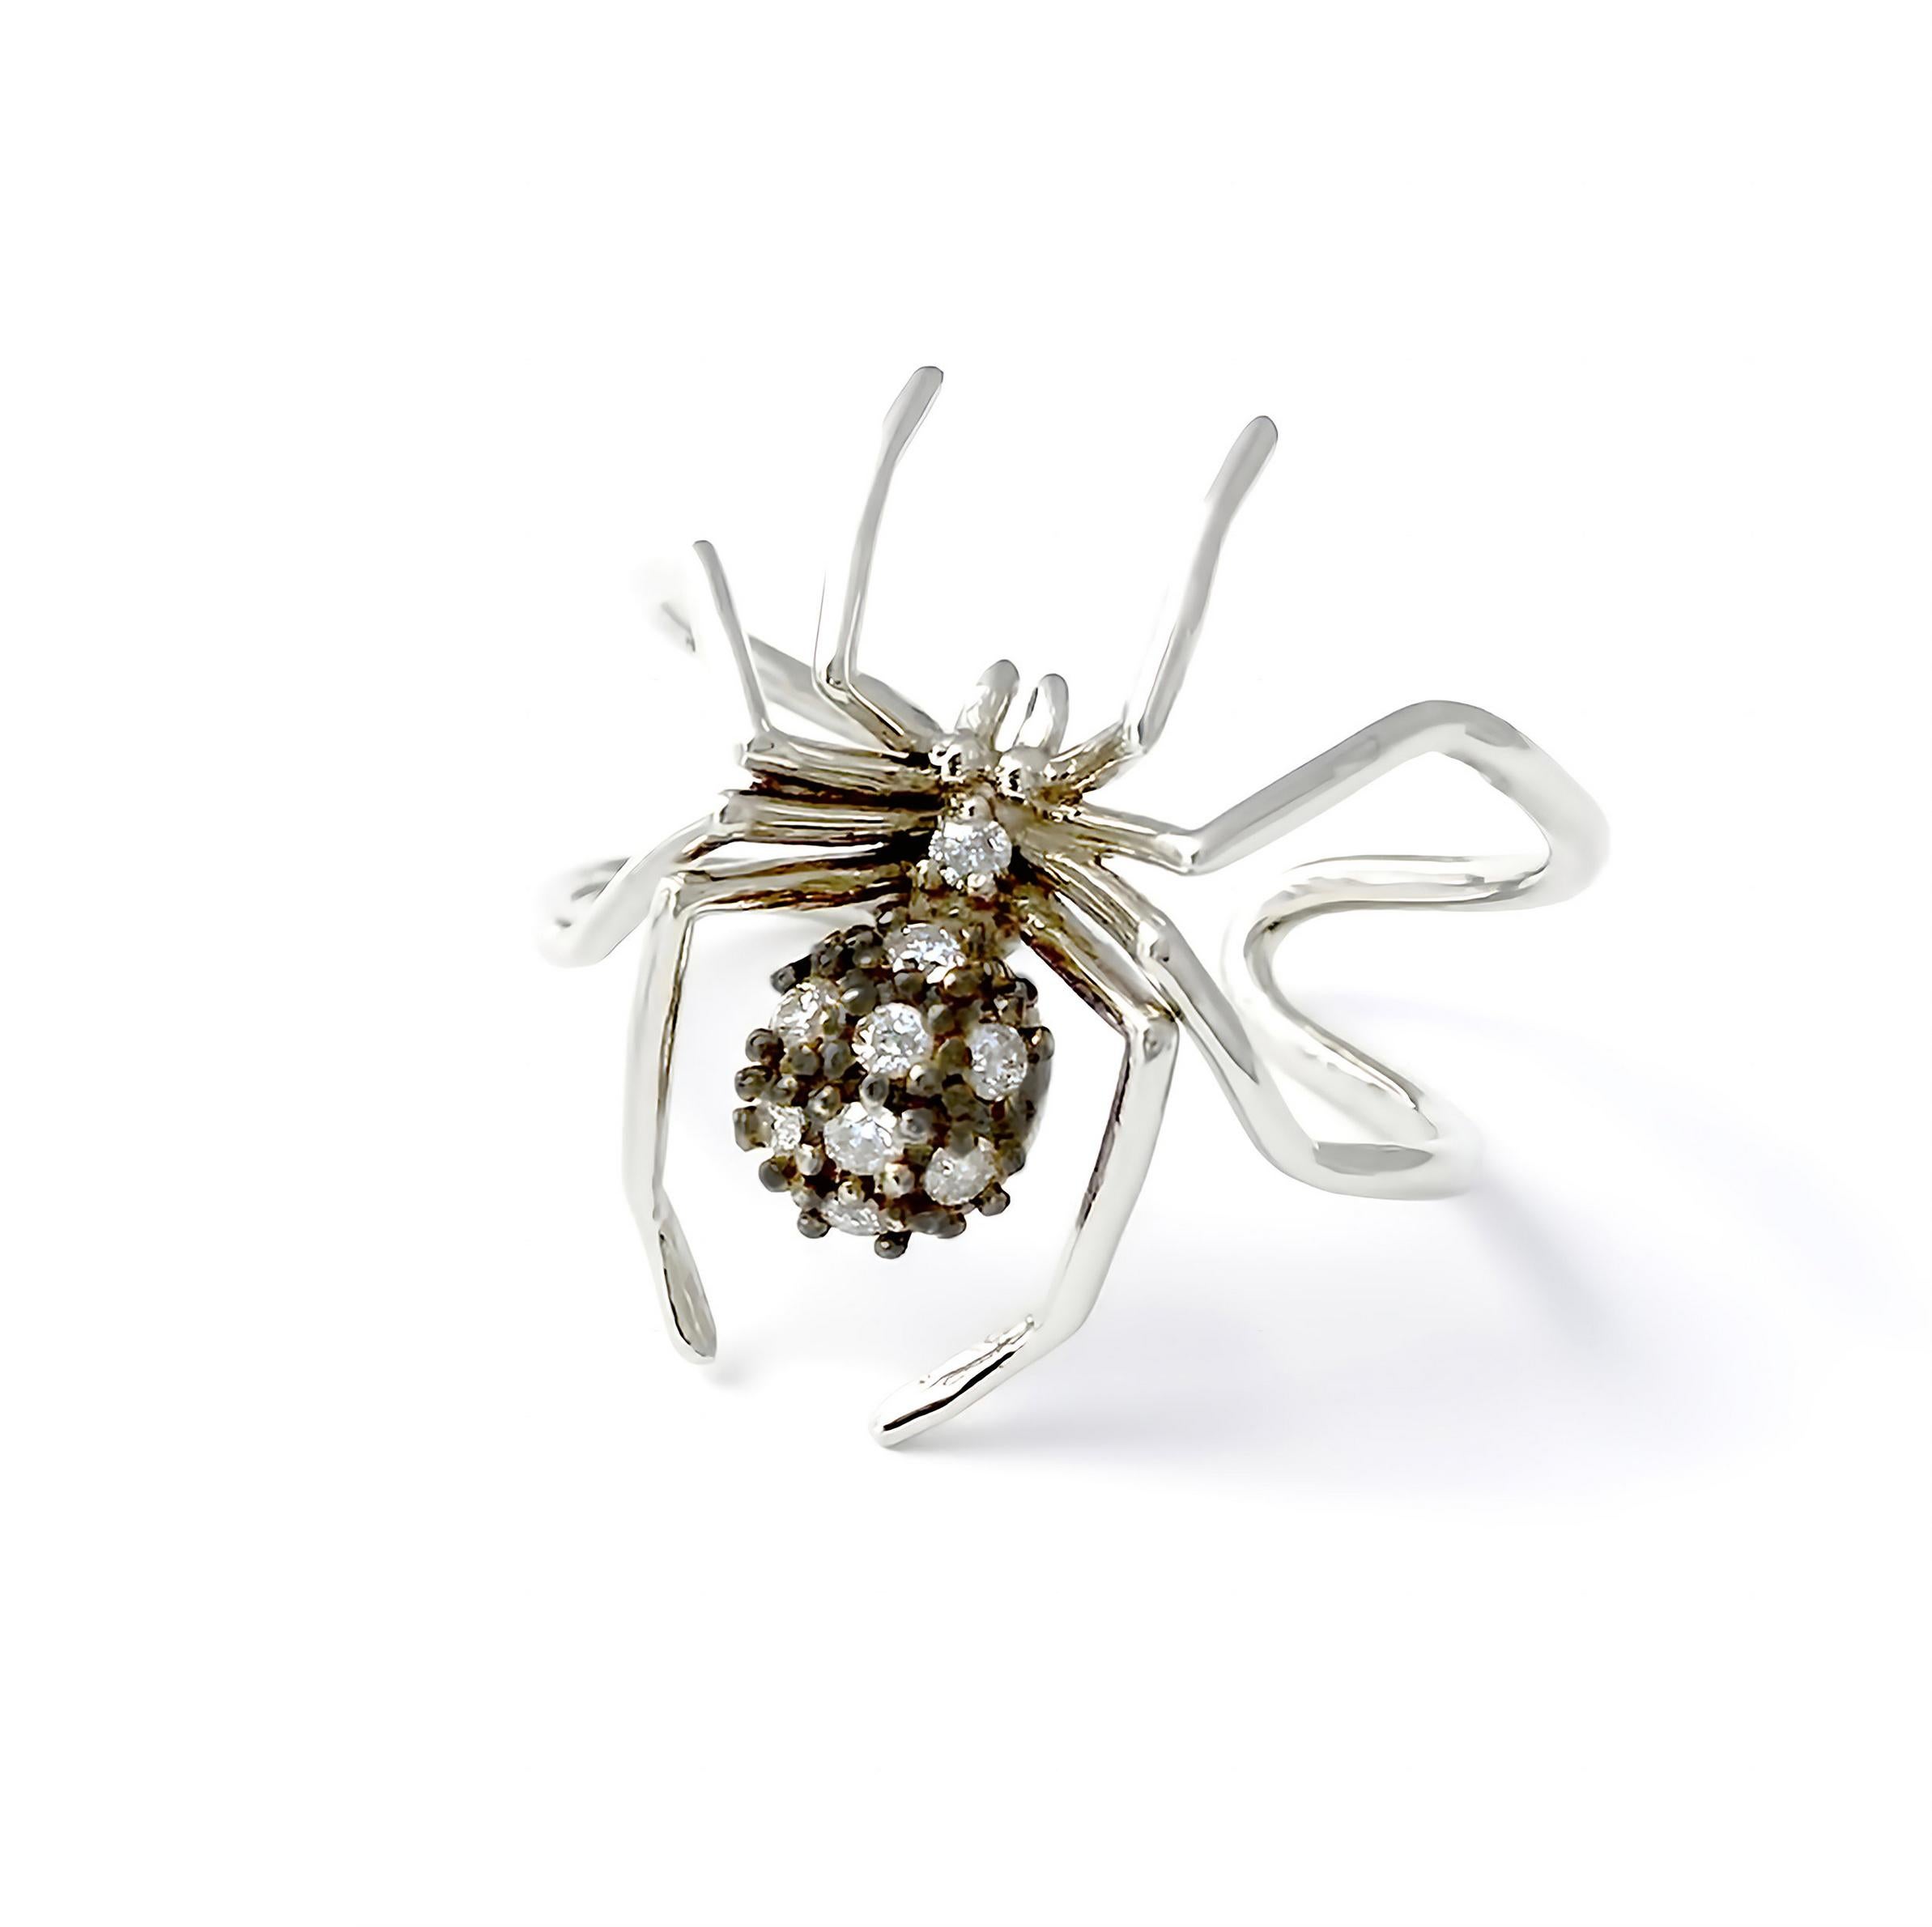 Introducing the exquisite Small Cocktail Spider Ring in White Gold and Black Rhodium, a captivating piece that embodies the spirit of creativity and self-determination. Inspired by the spider, a timeless symbol of ingenuity, this ring showcases the